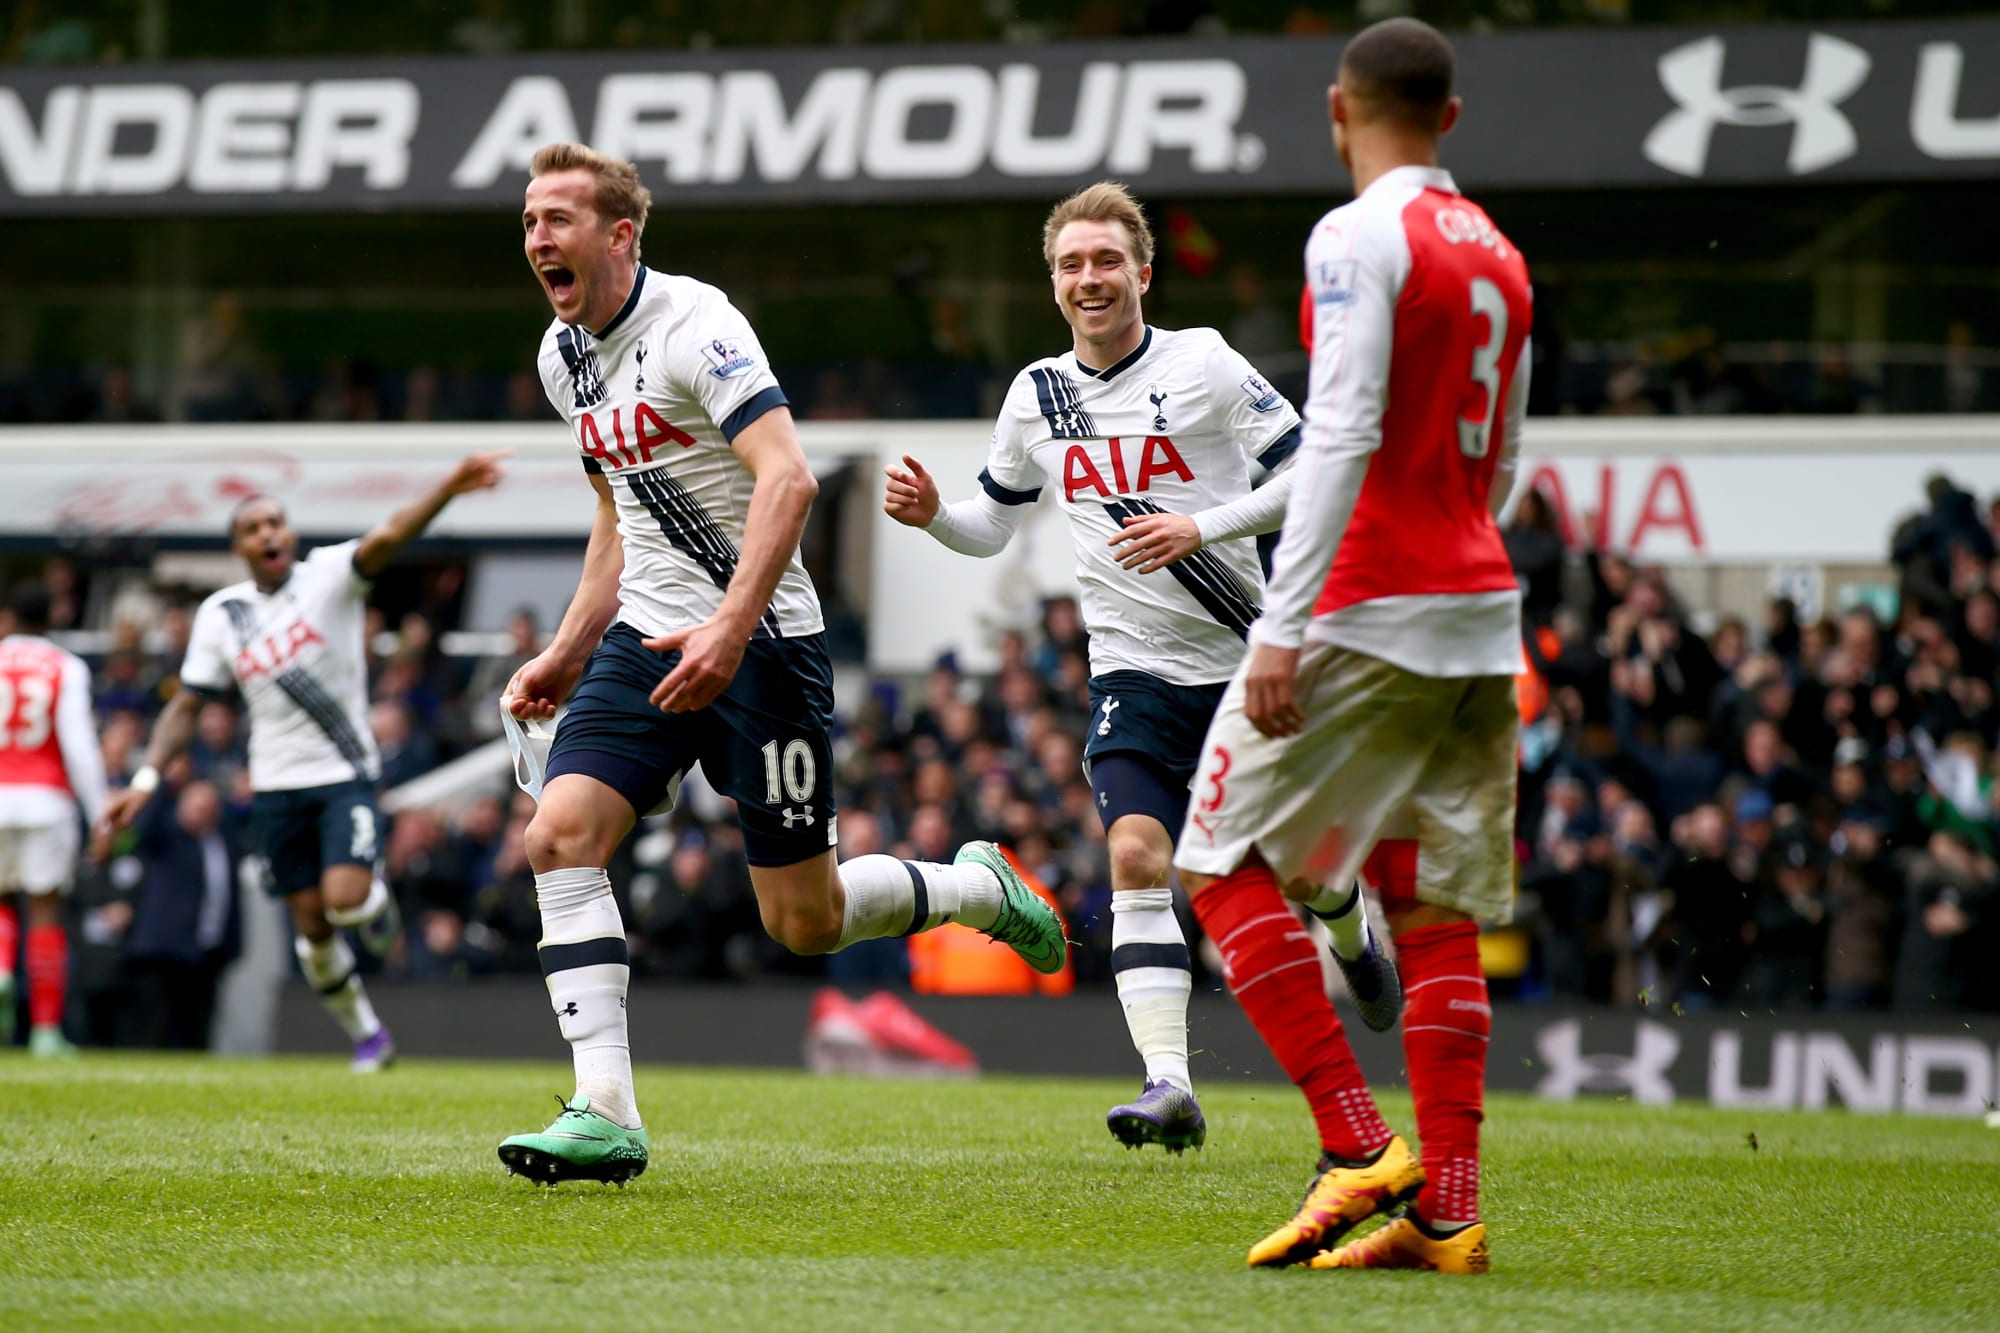 Tottenham Hotspur 2016/17 fixtures and three games to watch